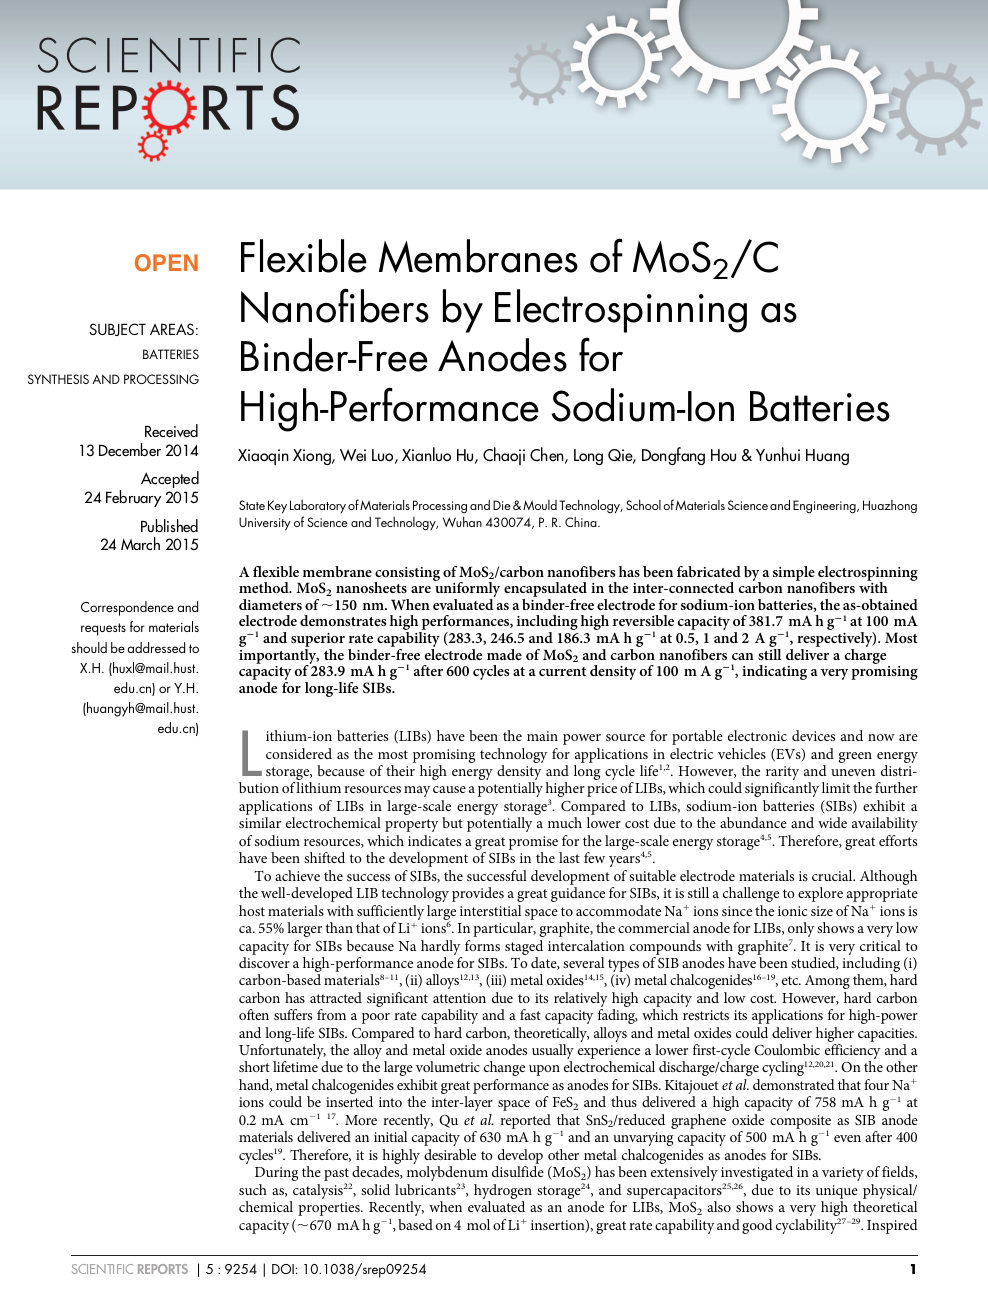 Flexible Membranes Of Mos2 C Nanofibers By Electrospinning As Binder Free Anodes For High Performance Sodium Ion Batteries Topic Of Research Paper In Nano Technology Download Scholarly Article Pdf And Read For Free On Cyberleninka Open